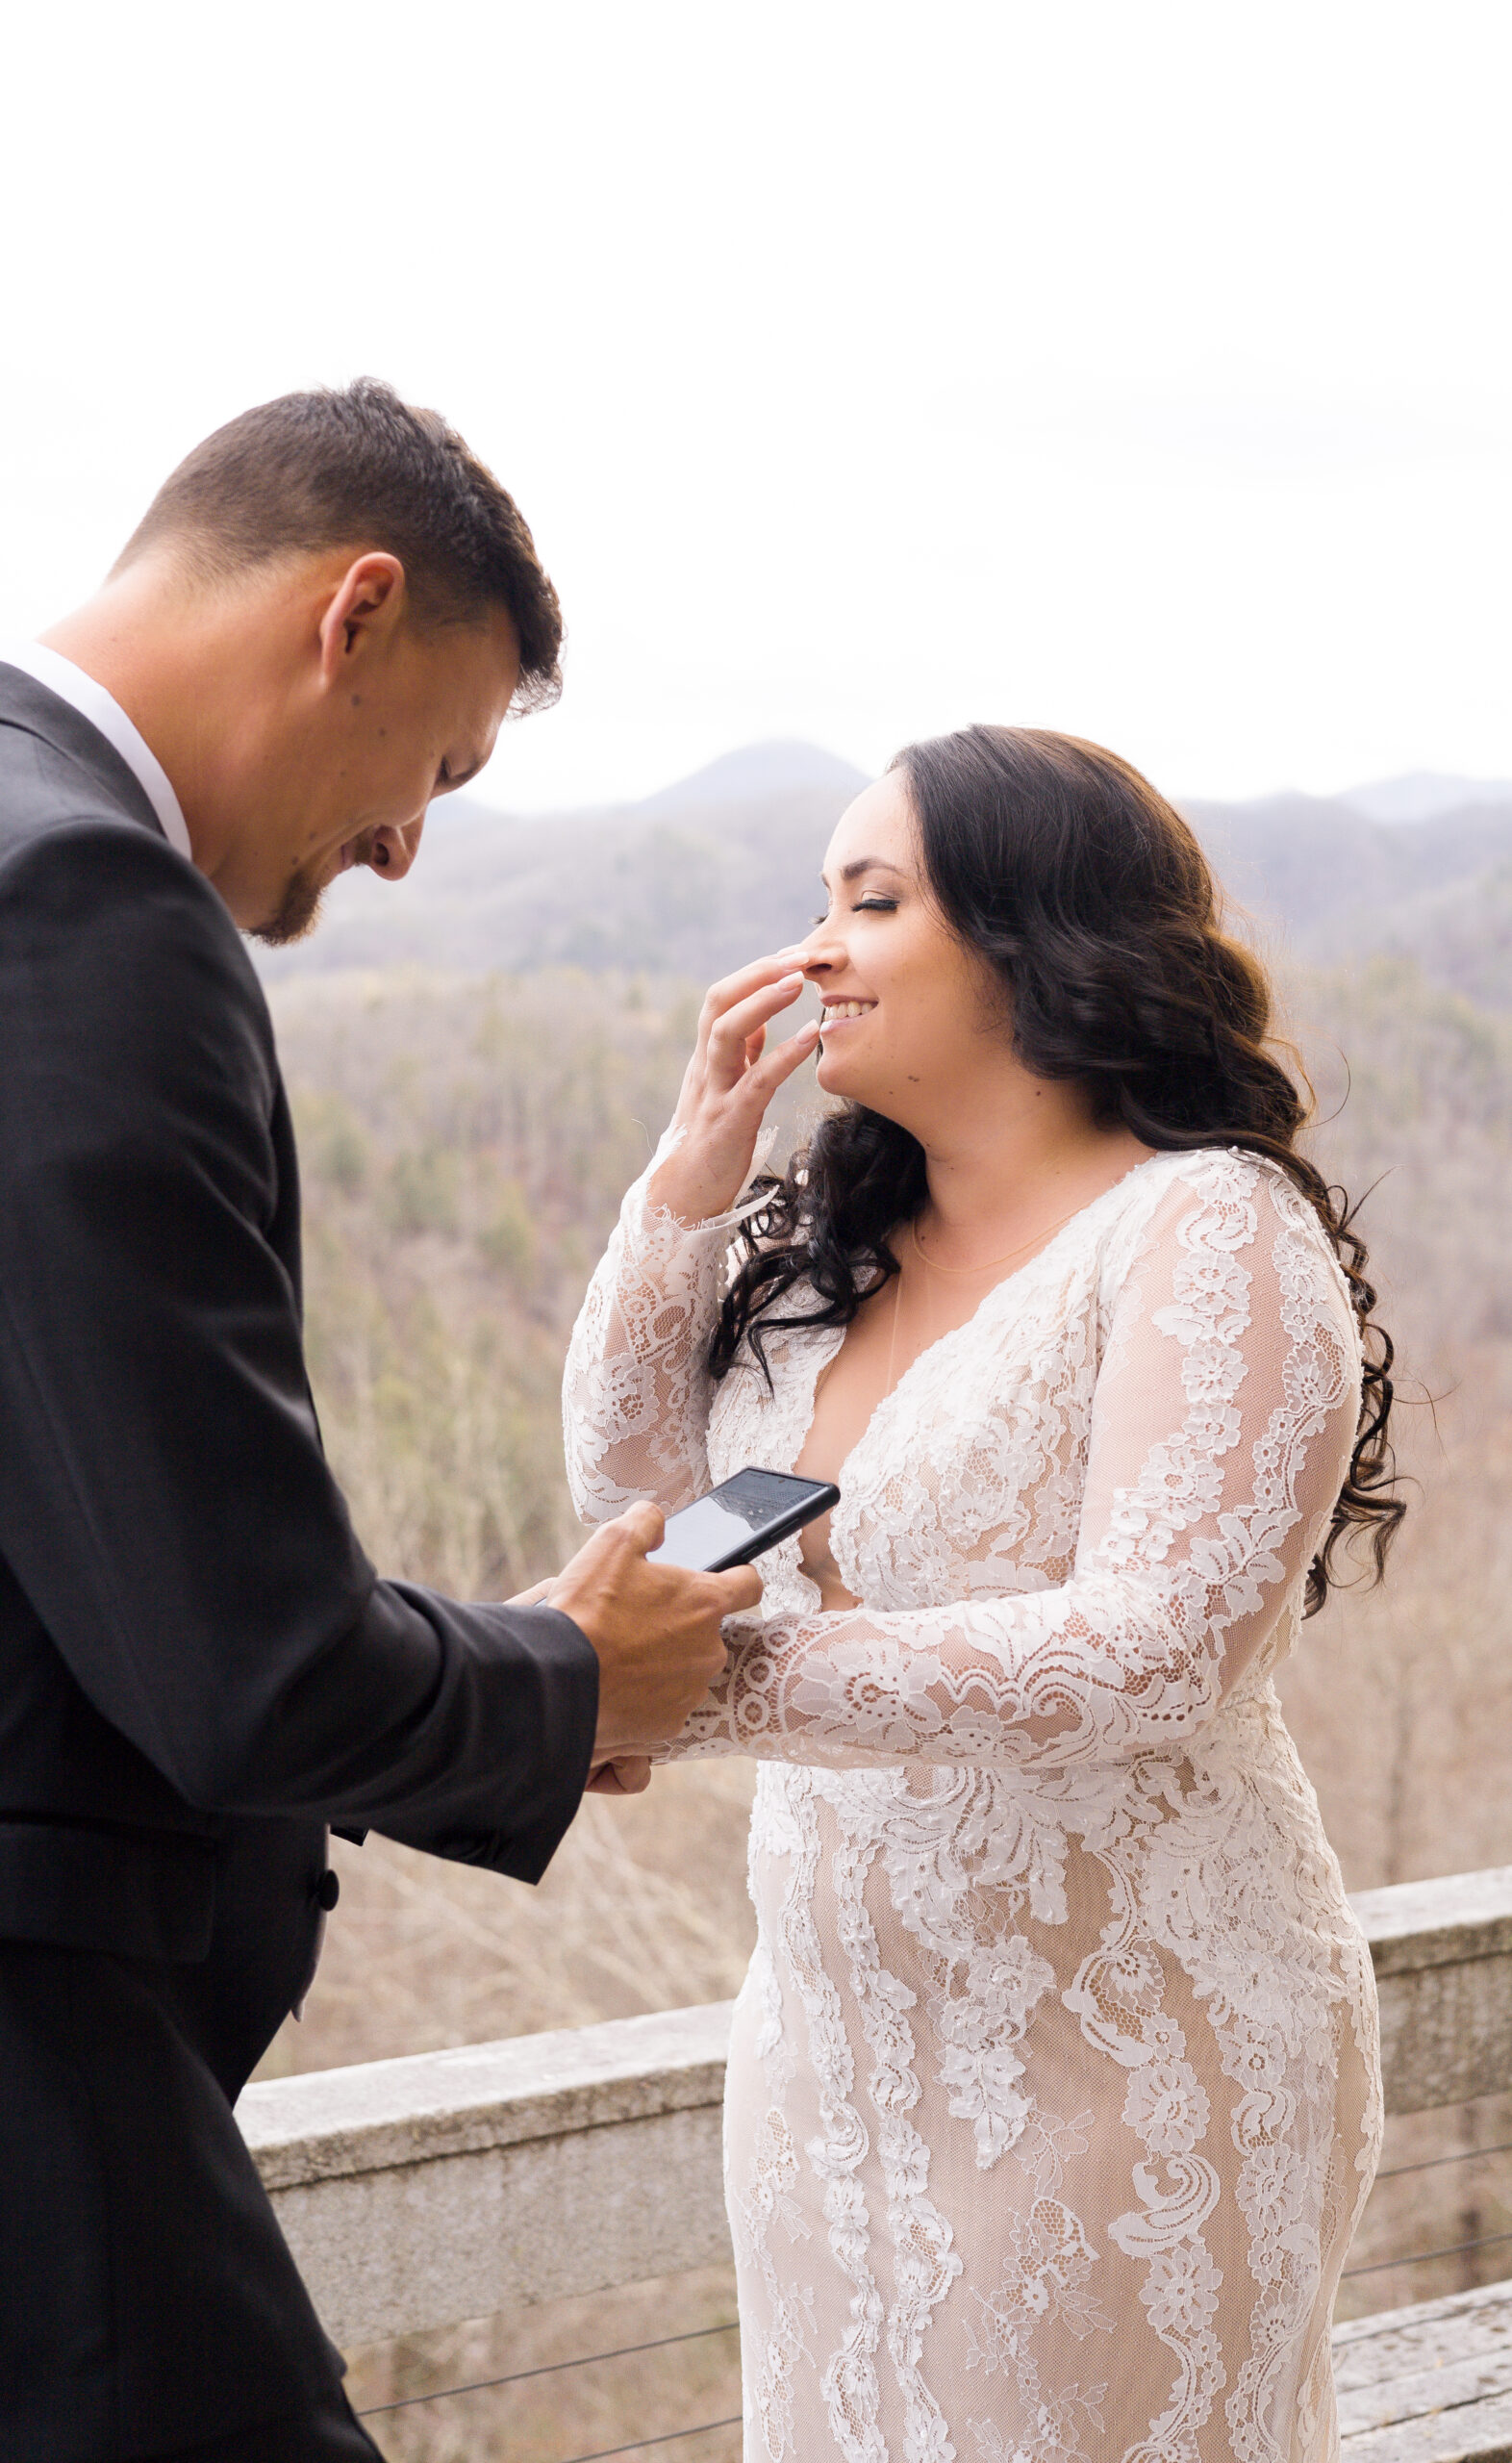 eloping in the smoky mountains of north carolina